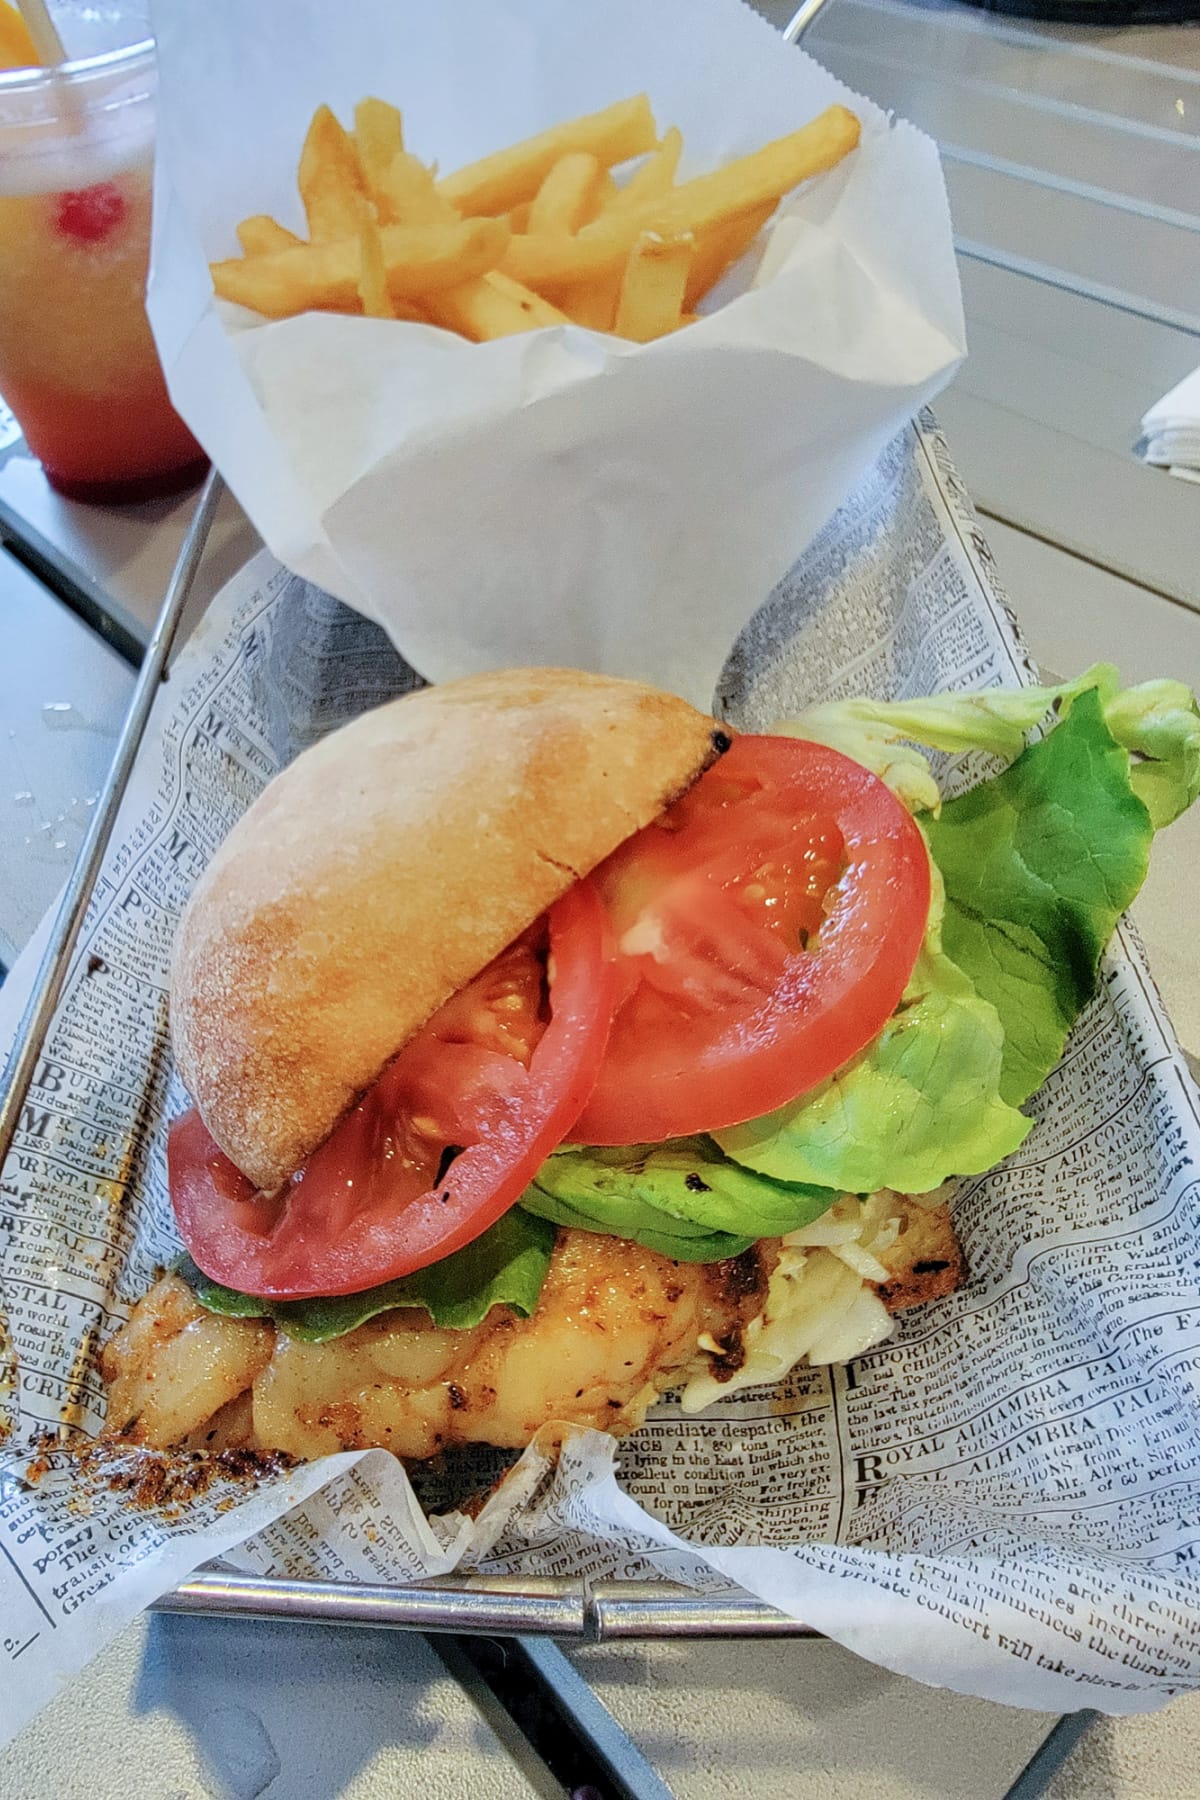 Chicken sandwich with tomatoes and fries